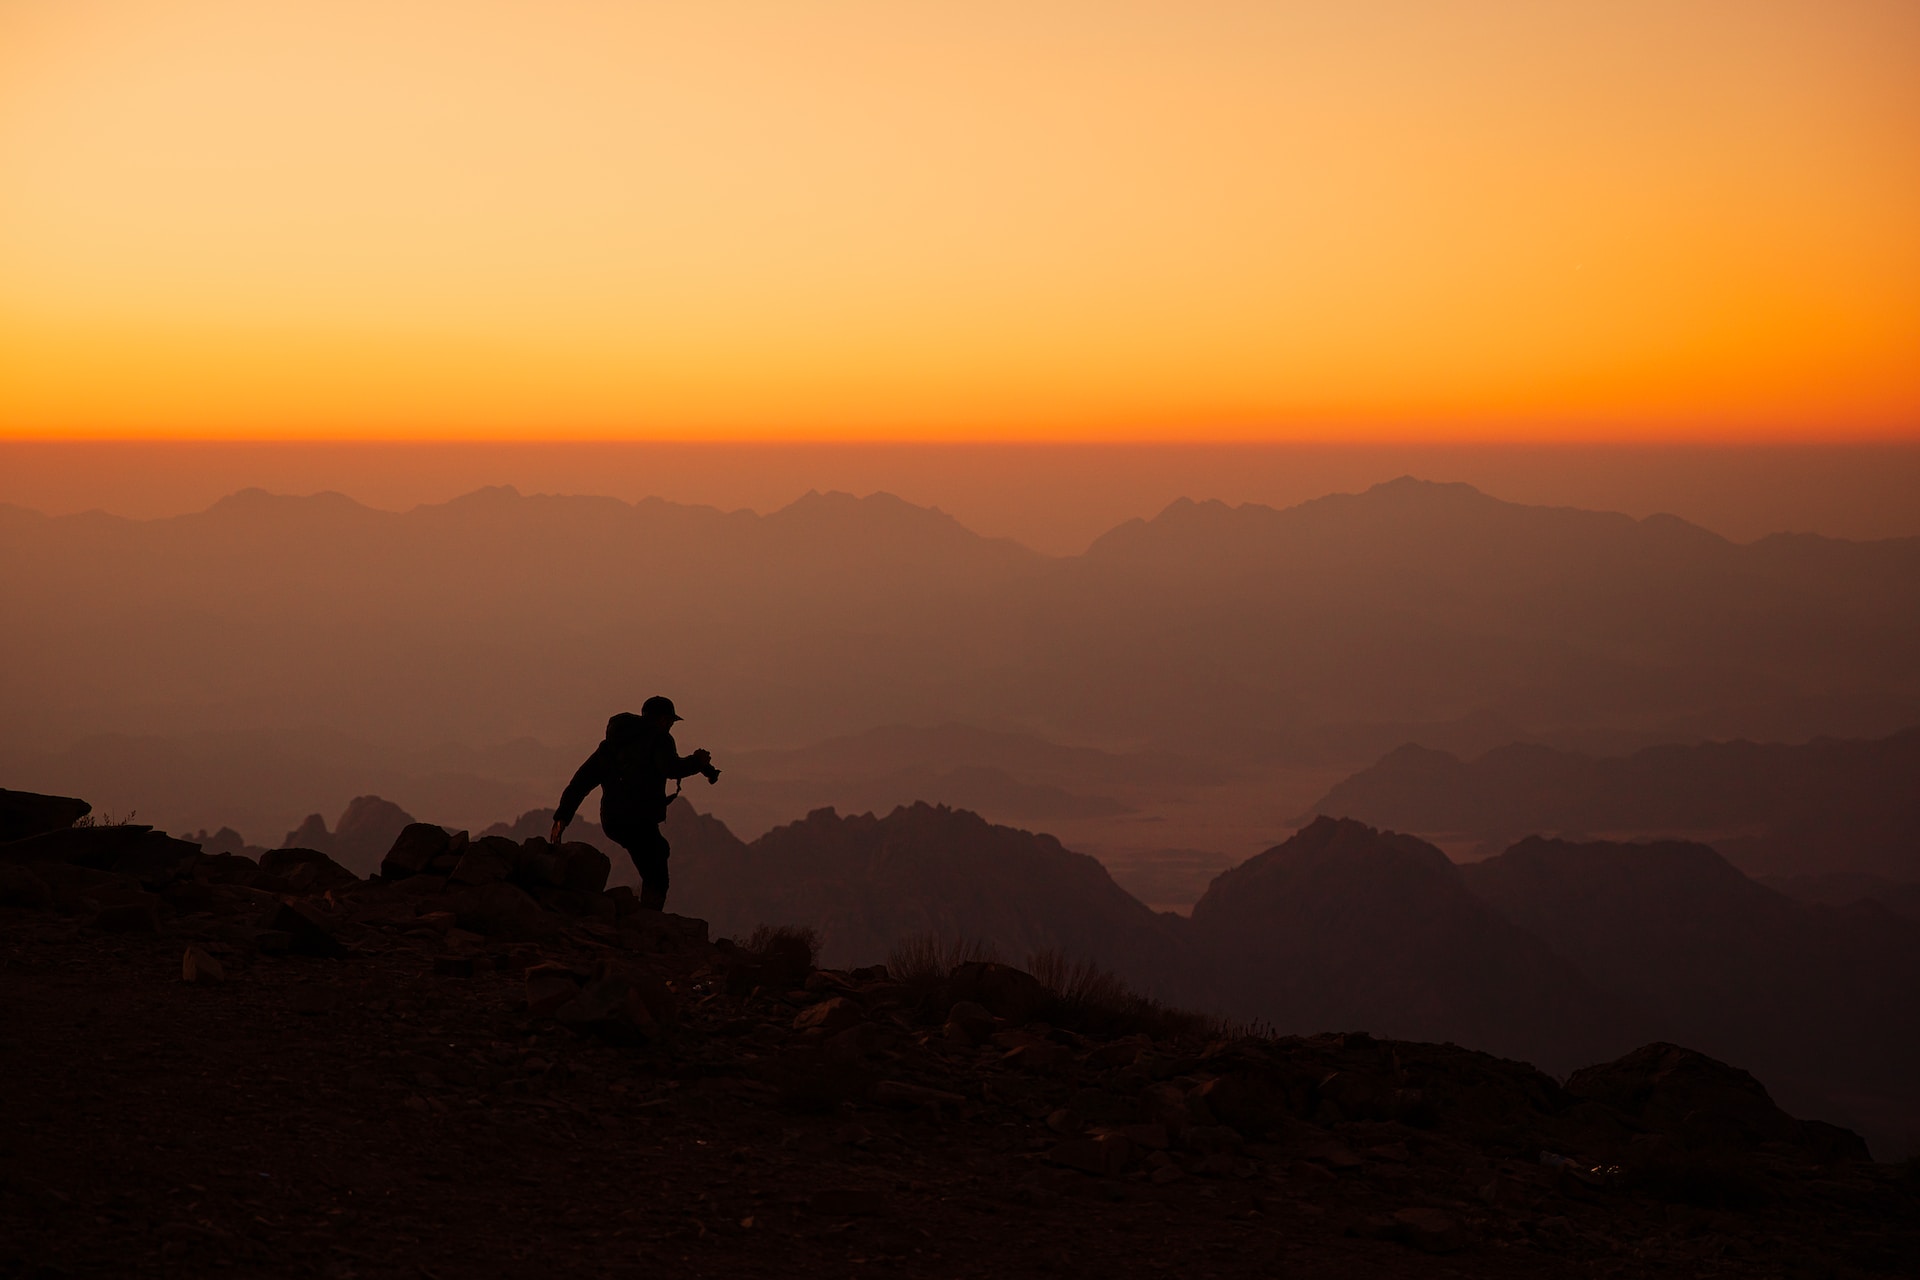 Silhouette of a hiker standing on top of a mountain with a bright orange sky in the background.